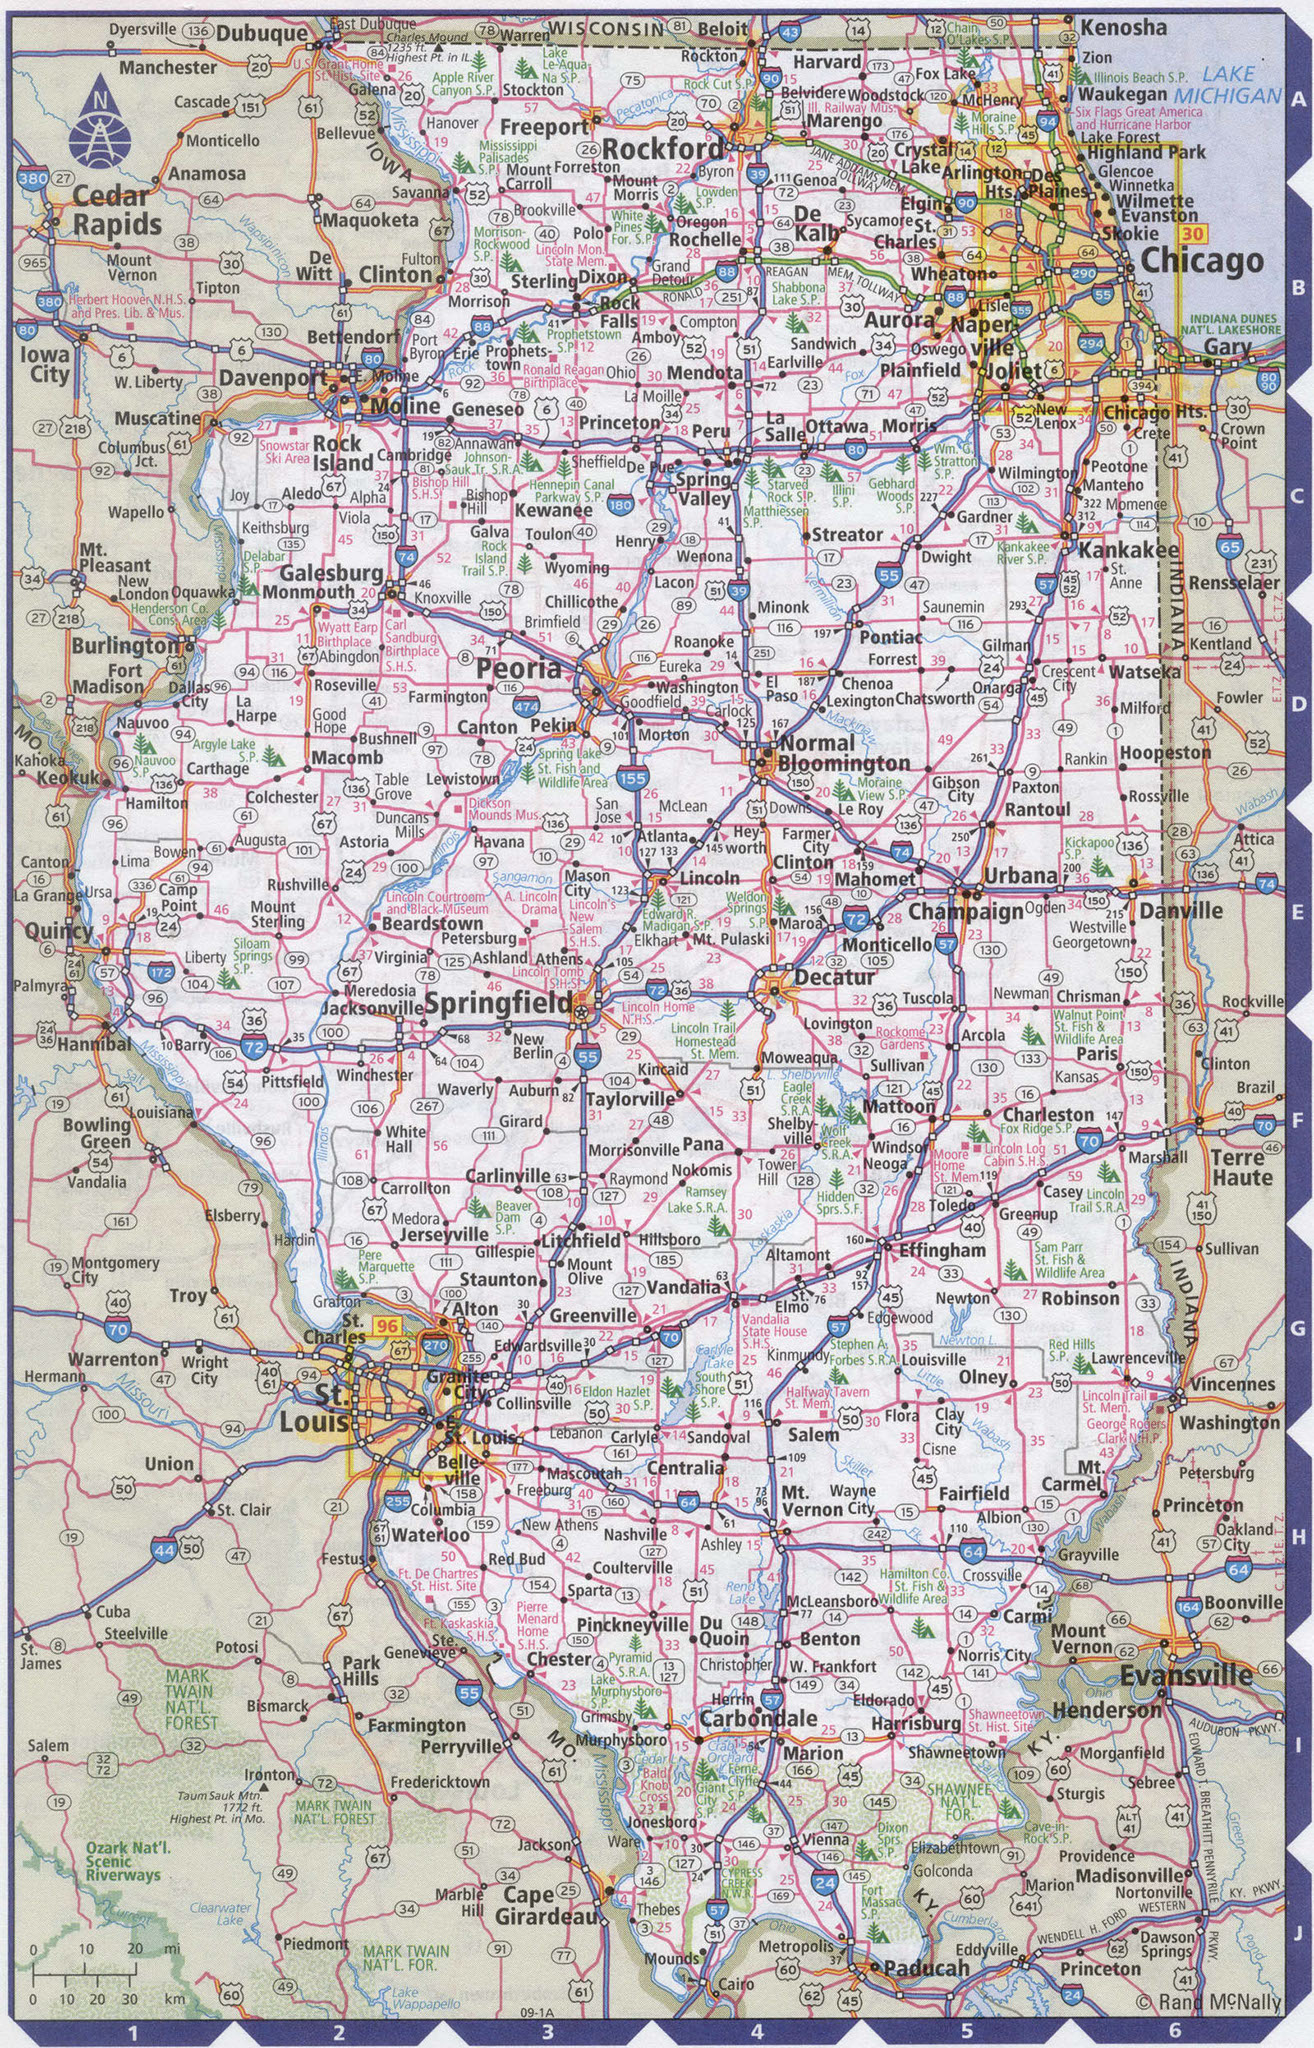 Illinois state complete map